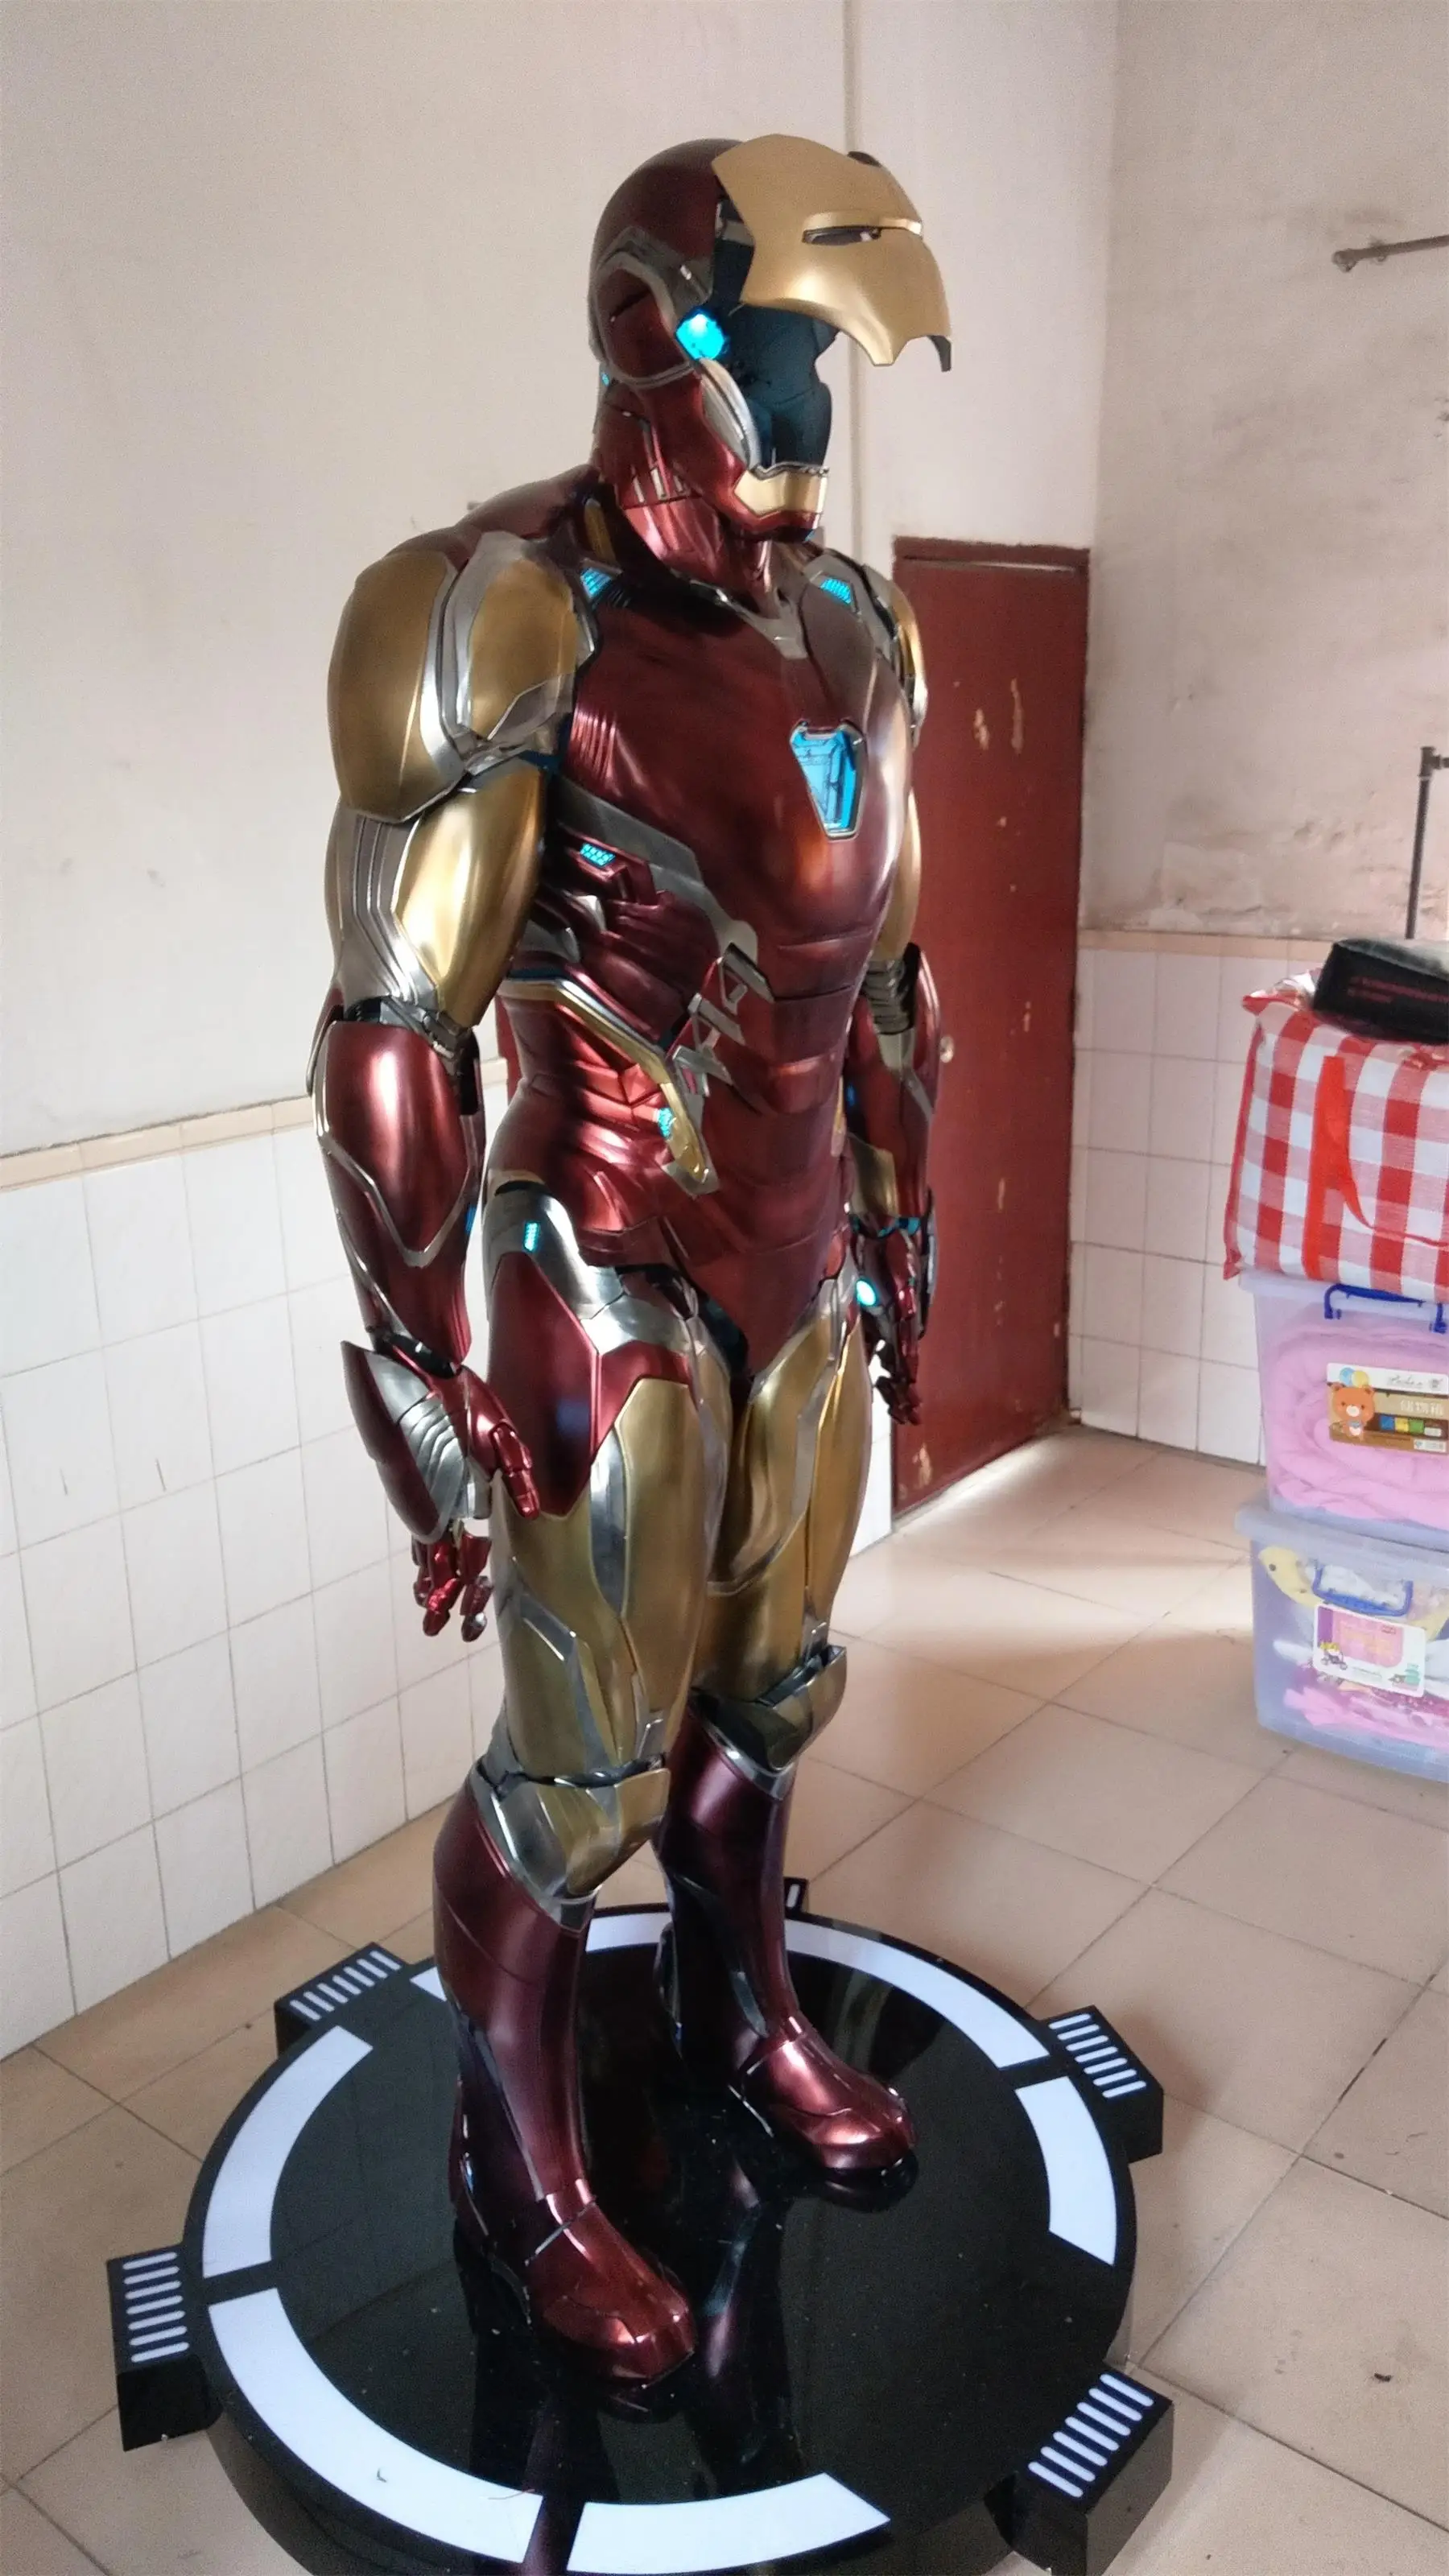 

Hot Customization 1/1 Marvel Mk85 Battle Armor Iron Man Armor Human Wearable Real Person All Over Helmet Statue Amazing Cosplay